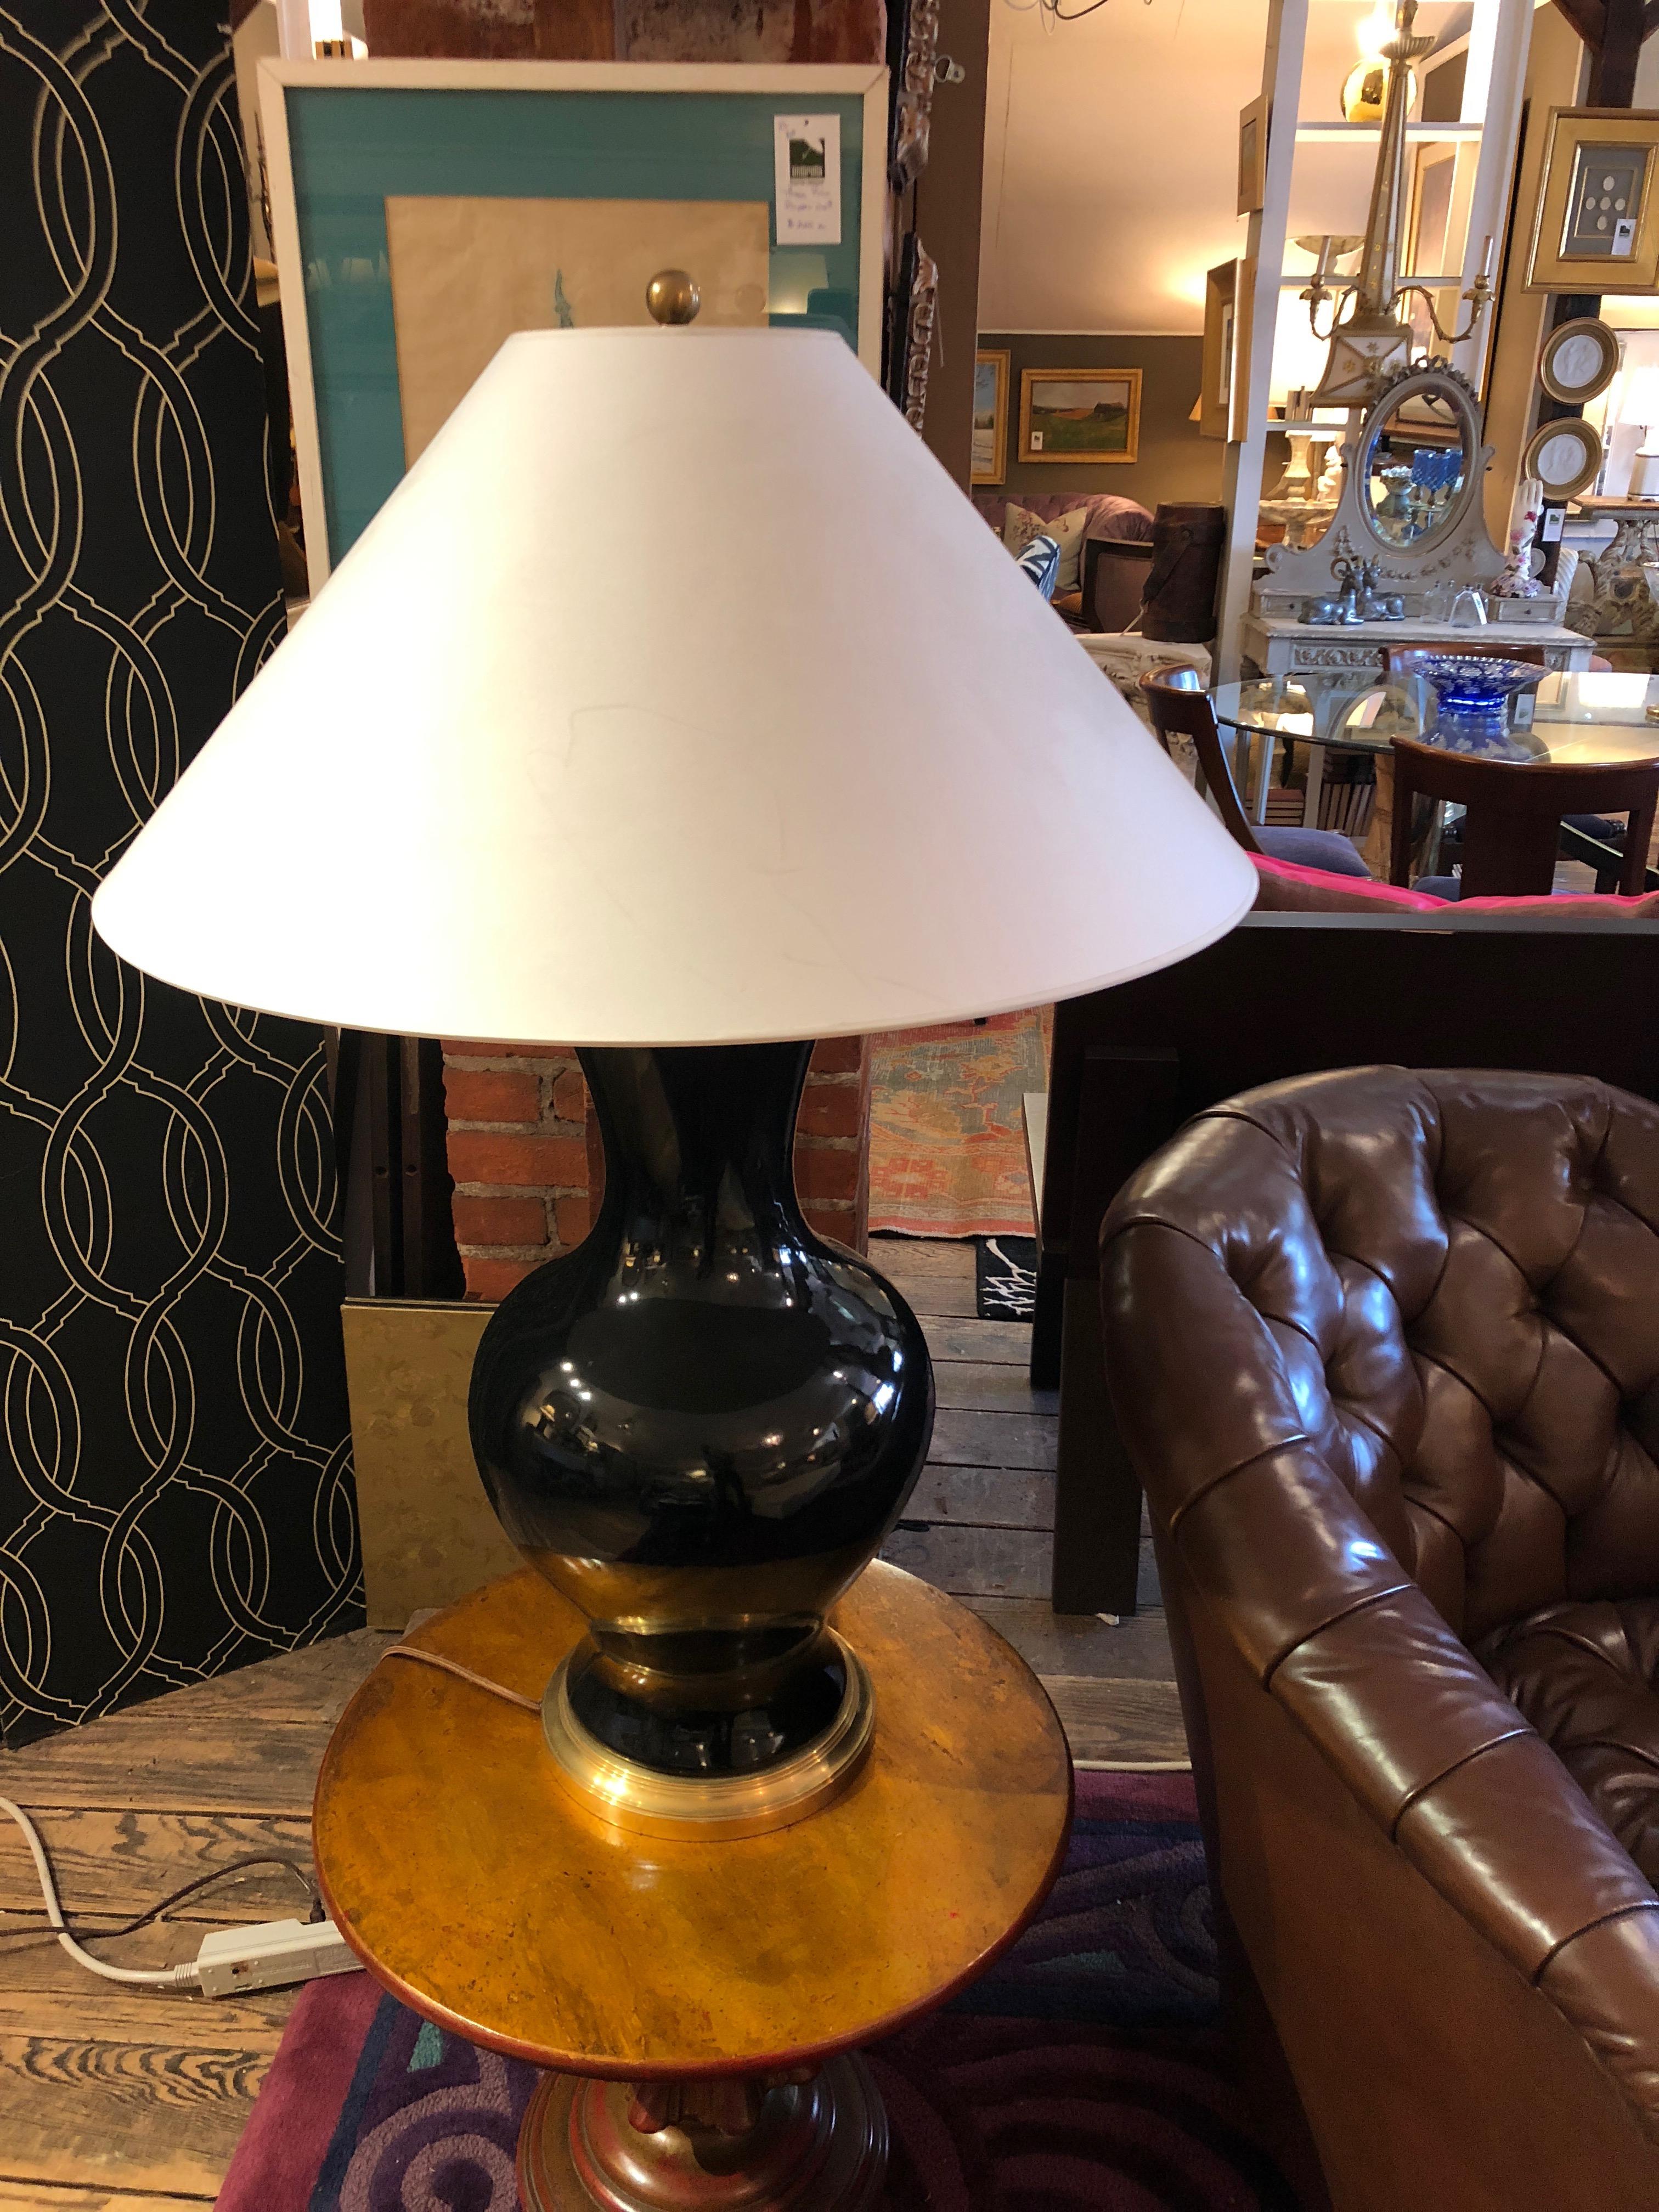 A statement lamp for its impressive size having a shiny black vase shaped base with brass accents and a huge custom paper shade.
The vase is 26 inches height x 12 inches diameter.